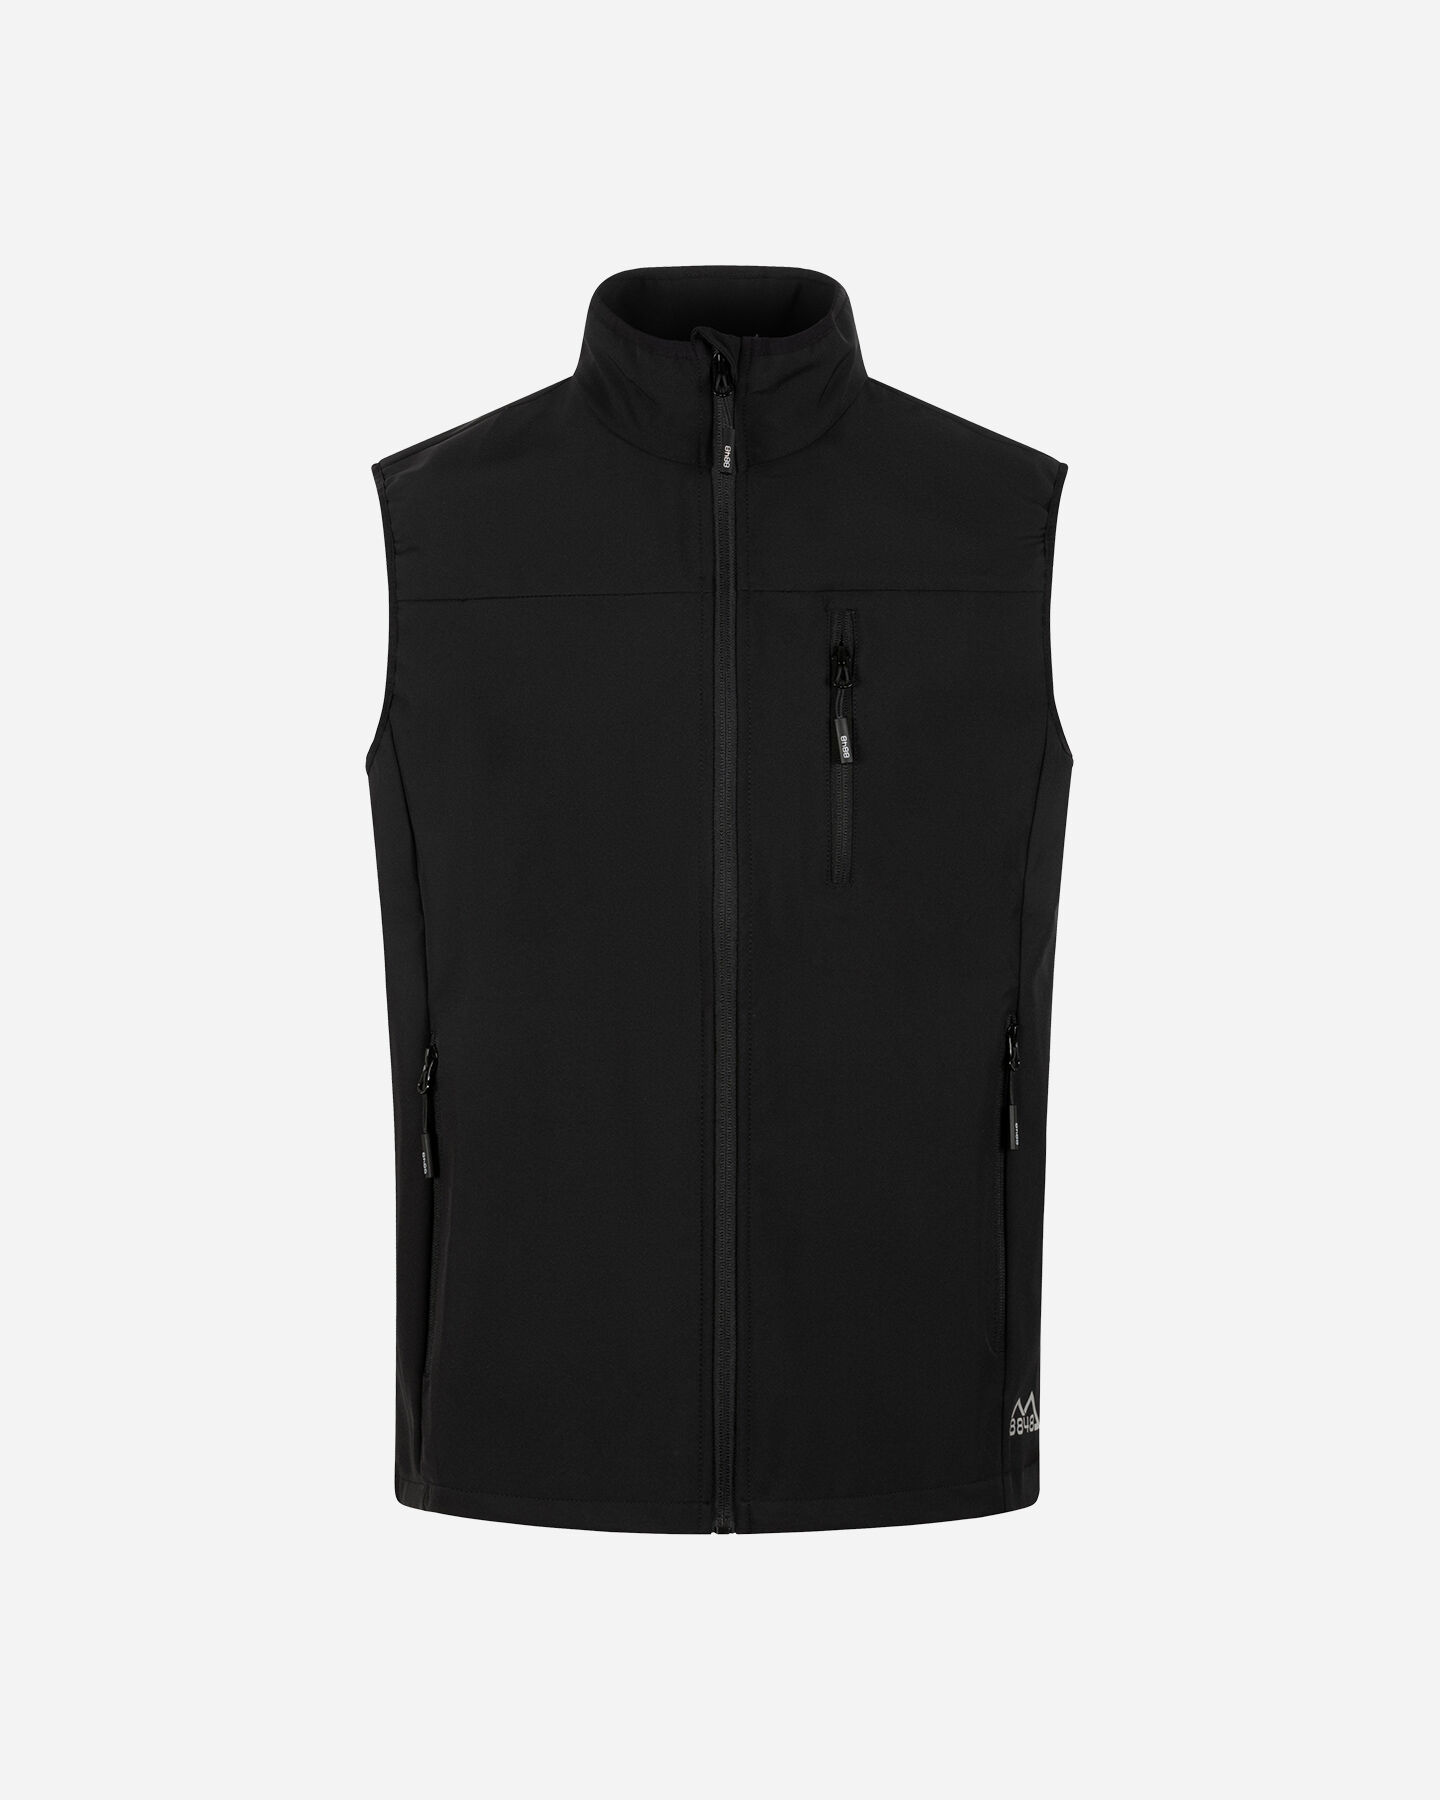  Gilet 8848 MOUNTAIN HIKE M S4130910|050|S scatto 5